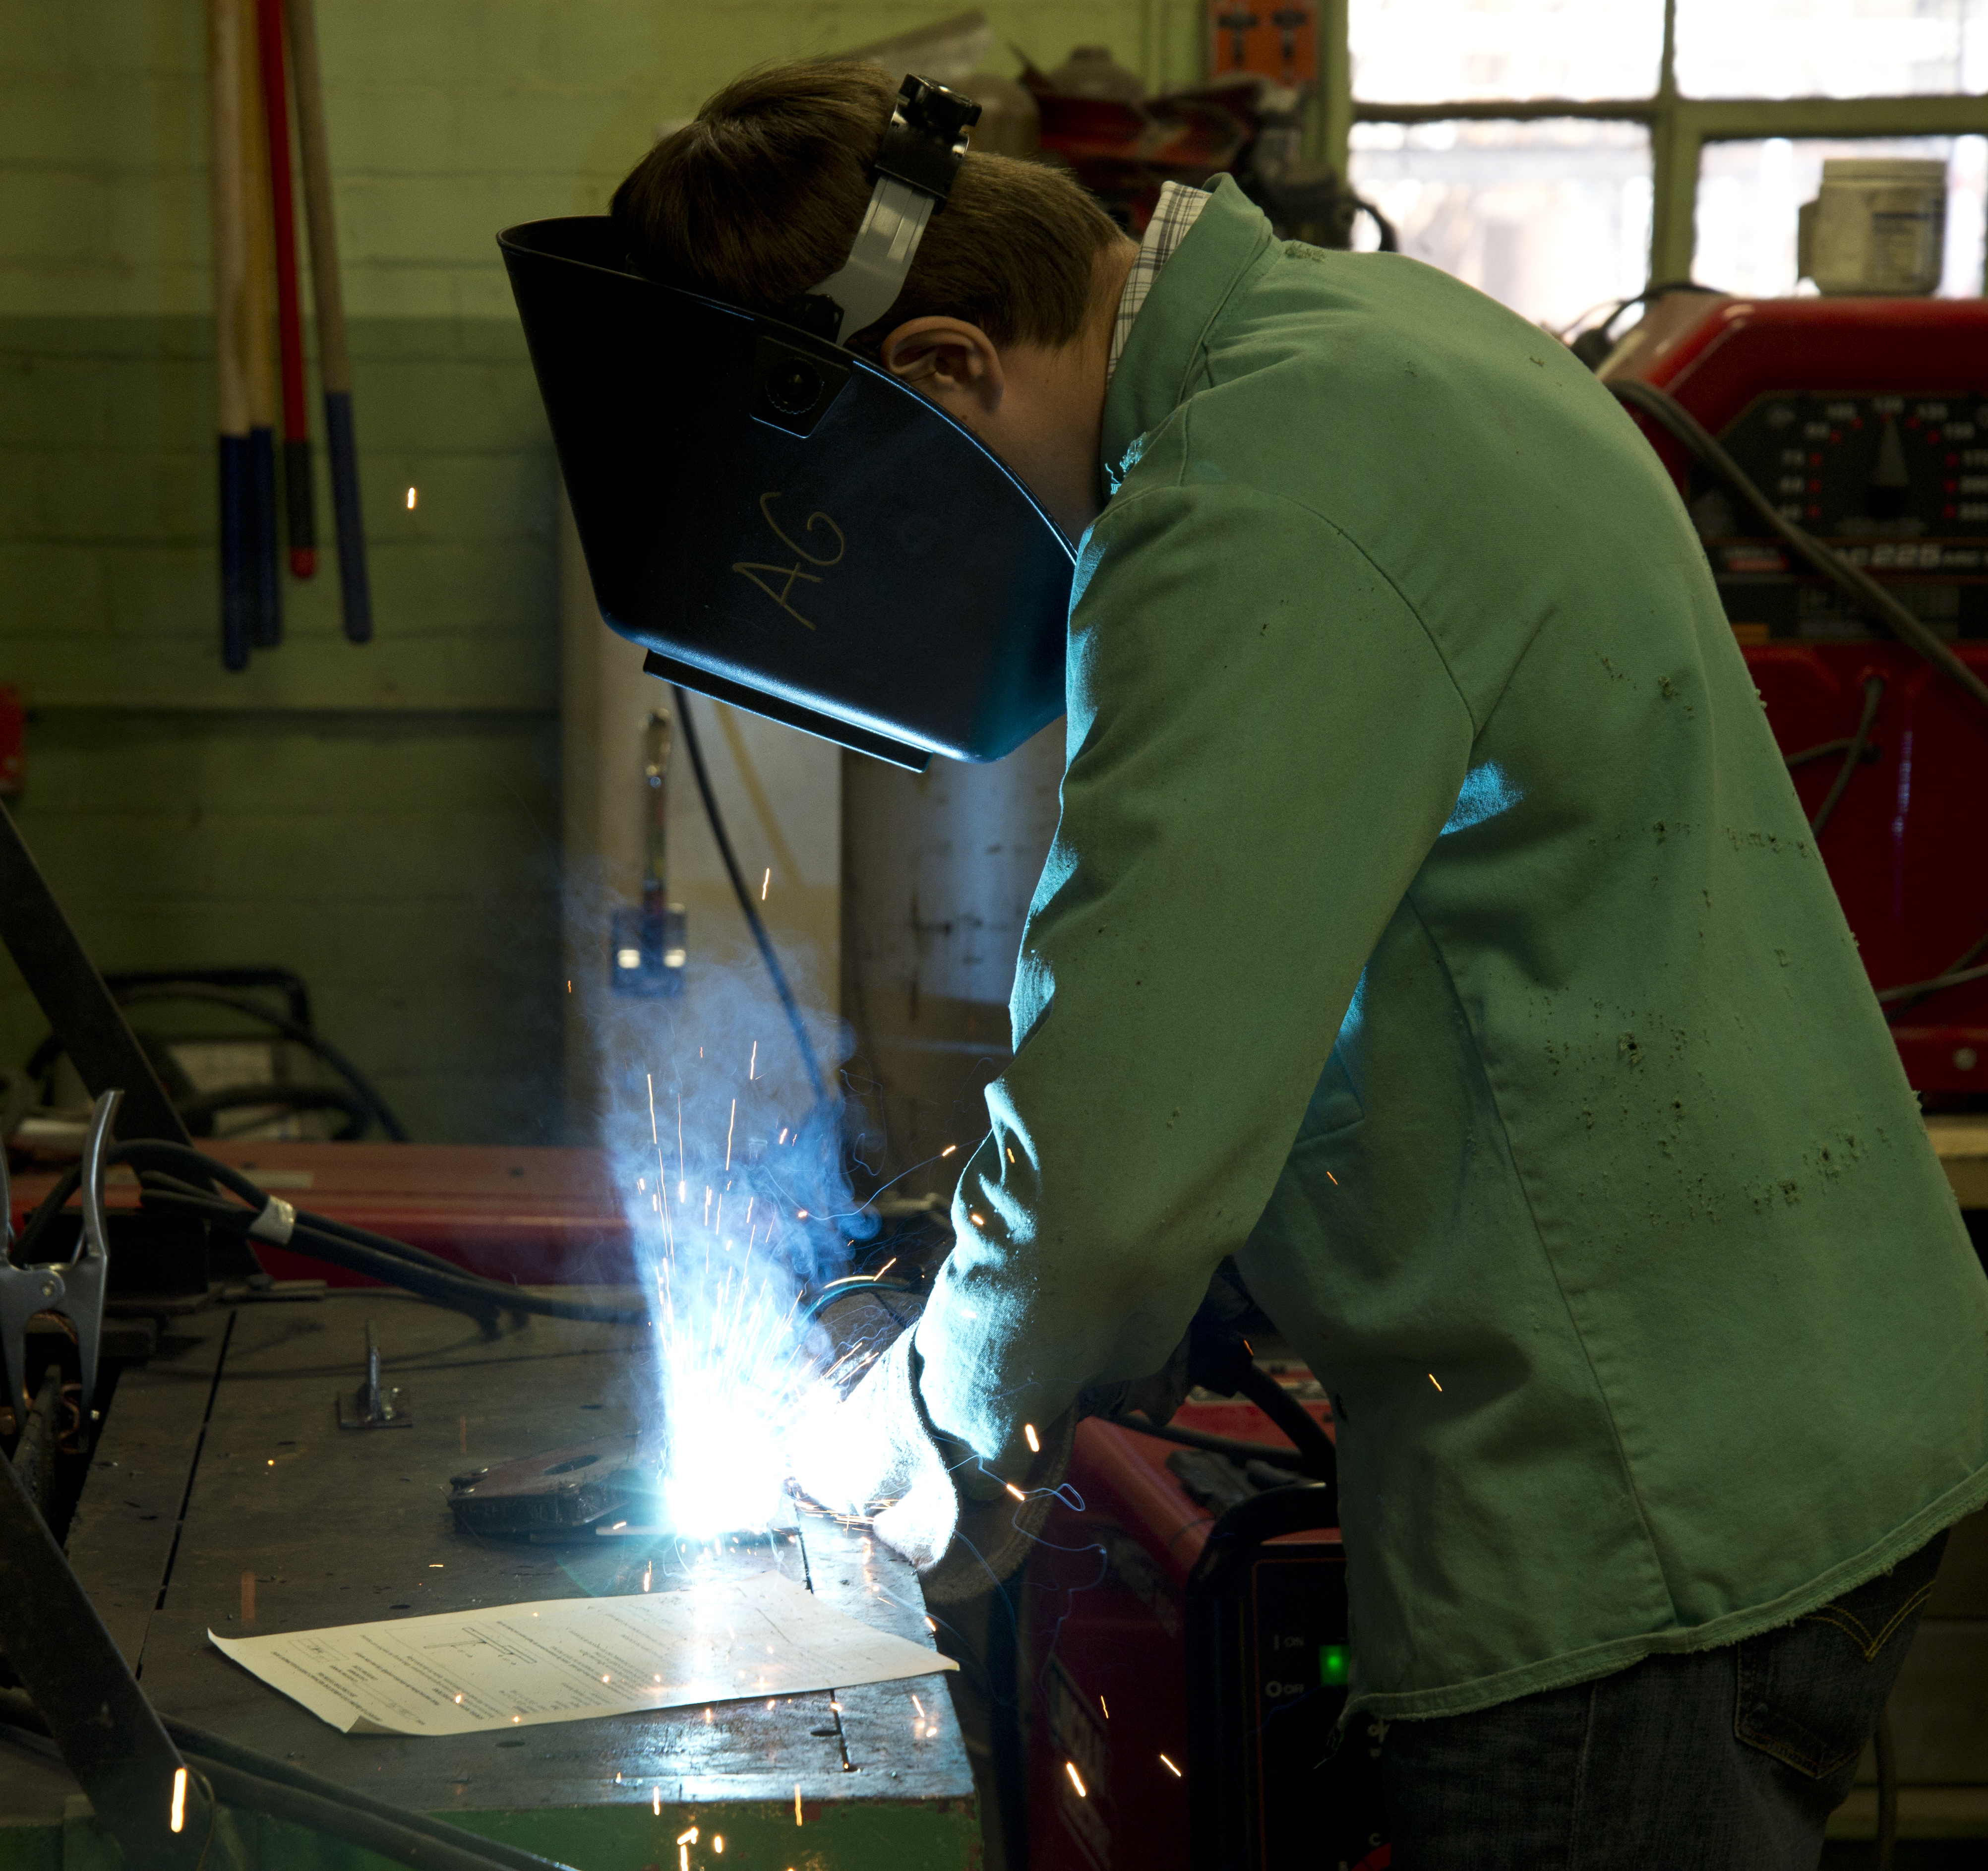 Student welding at the ATEC.